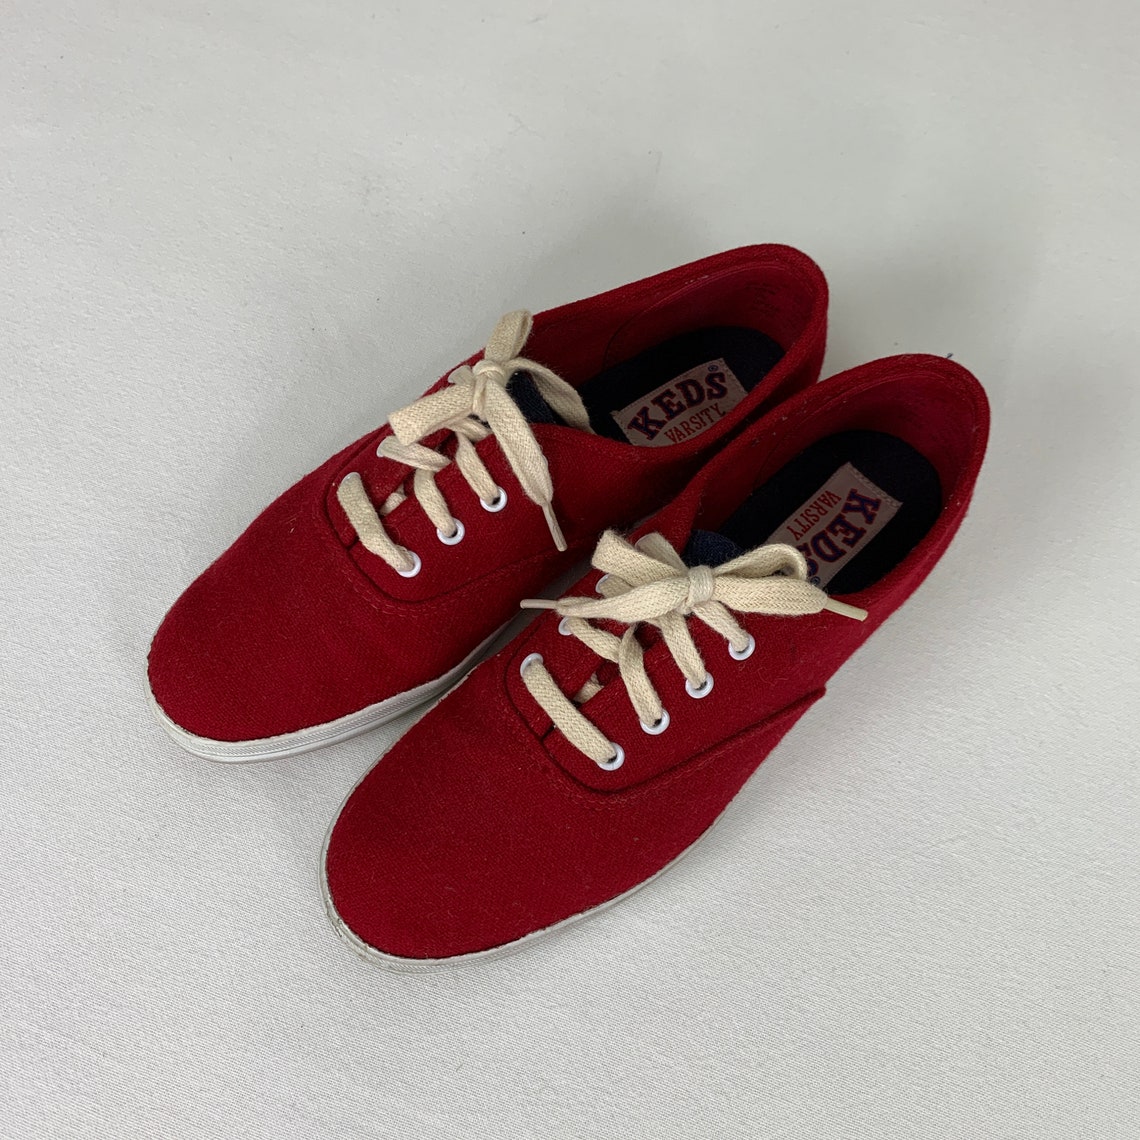 KEDS 90s Size 7 7.5 Women's Vintage Red Classic Skinny | Etsy